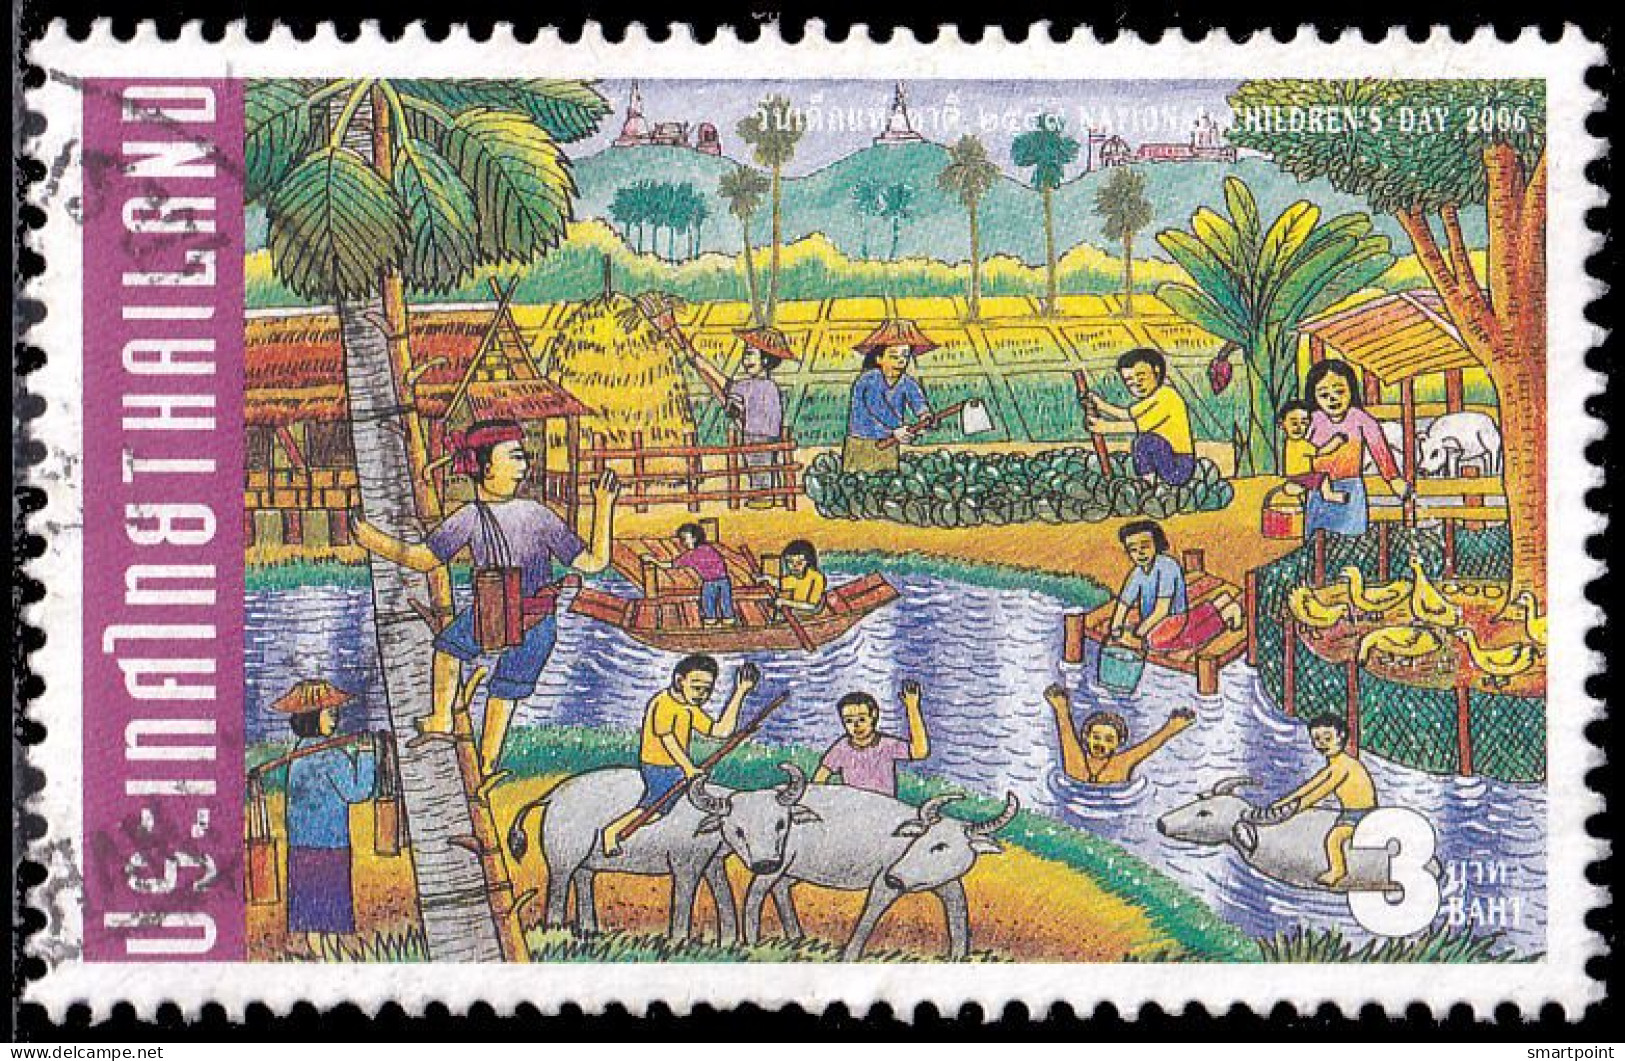 Thailand Stamp 2006 National Children's Day 3 Baht - Used - Thailand